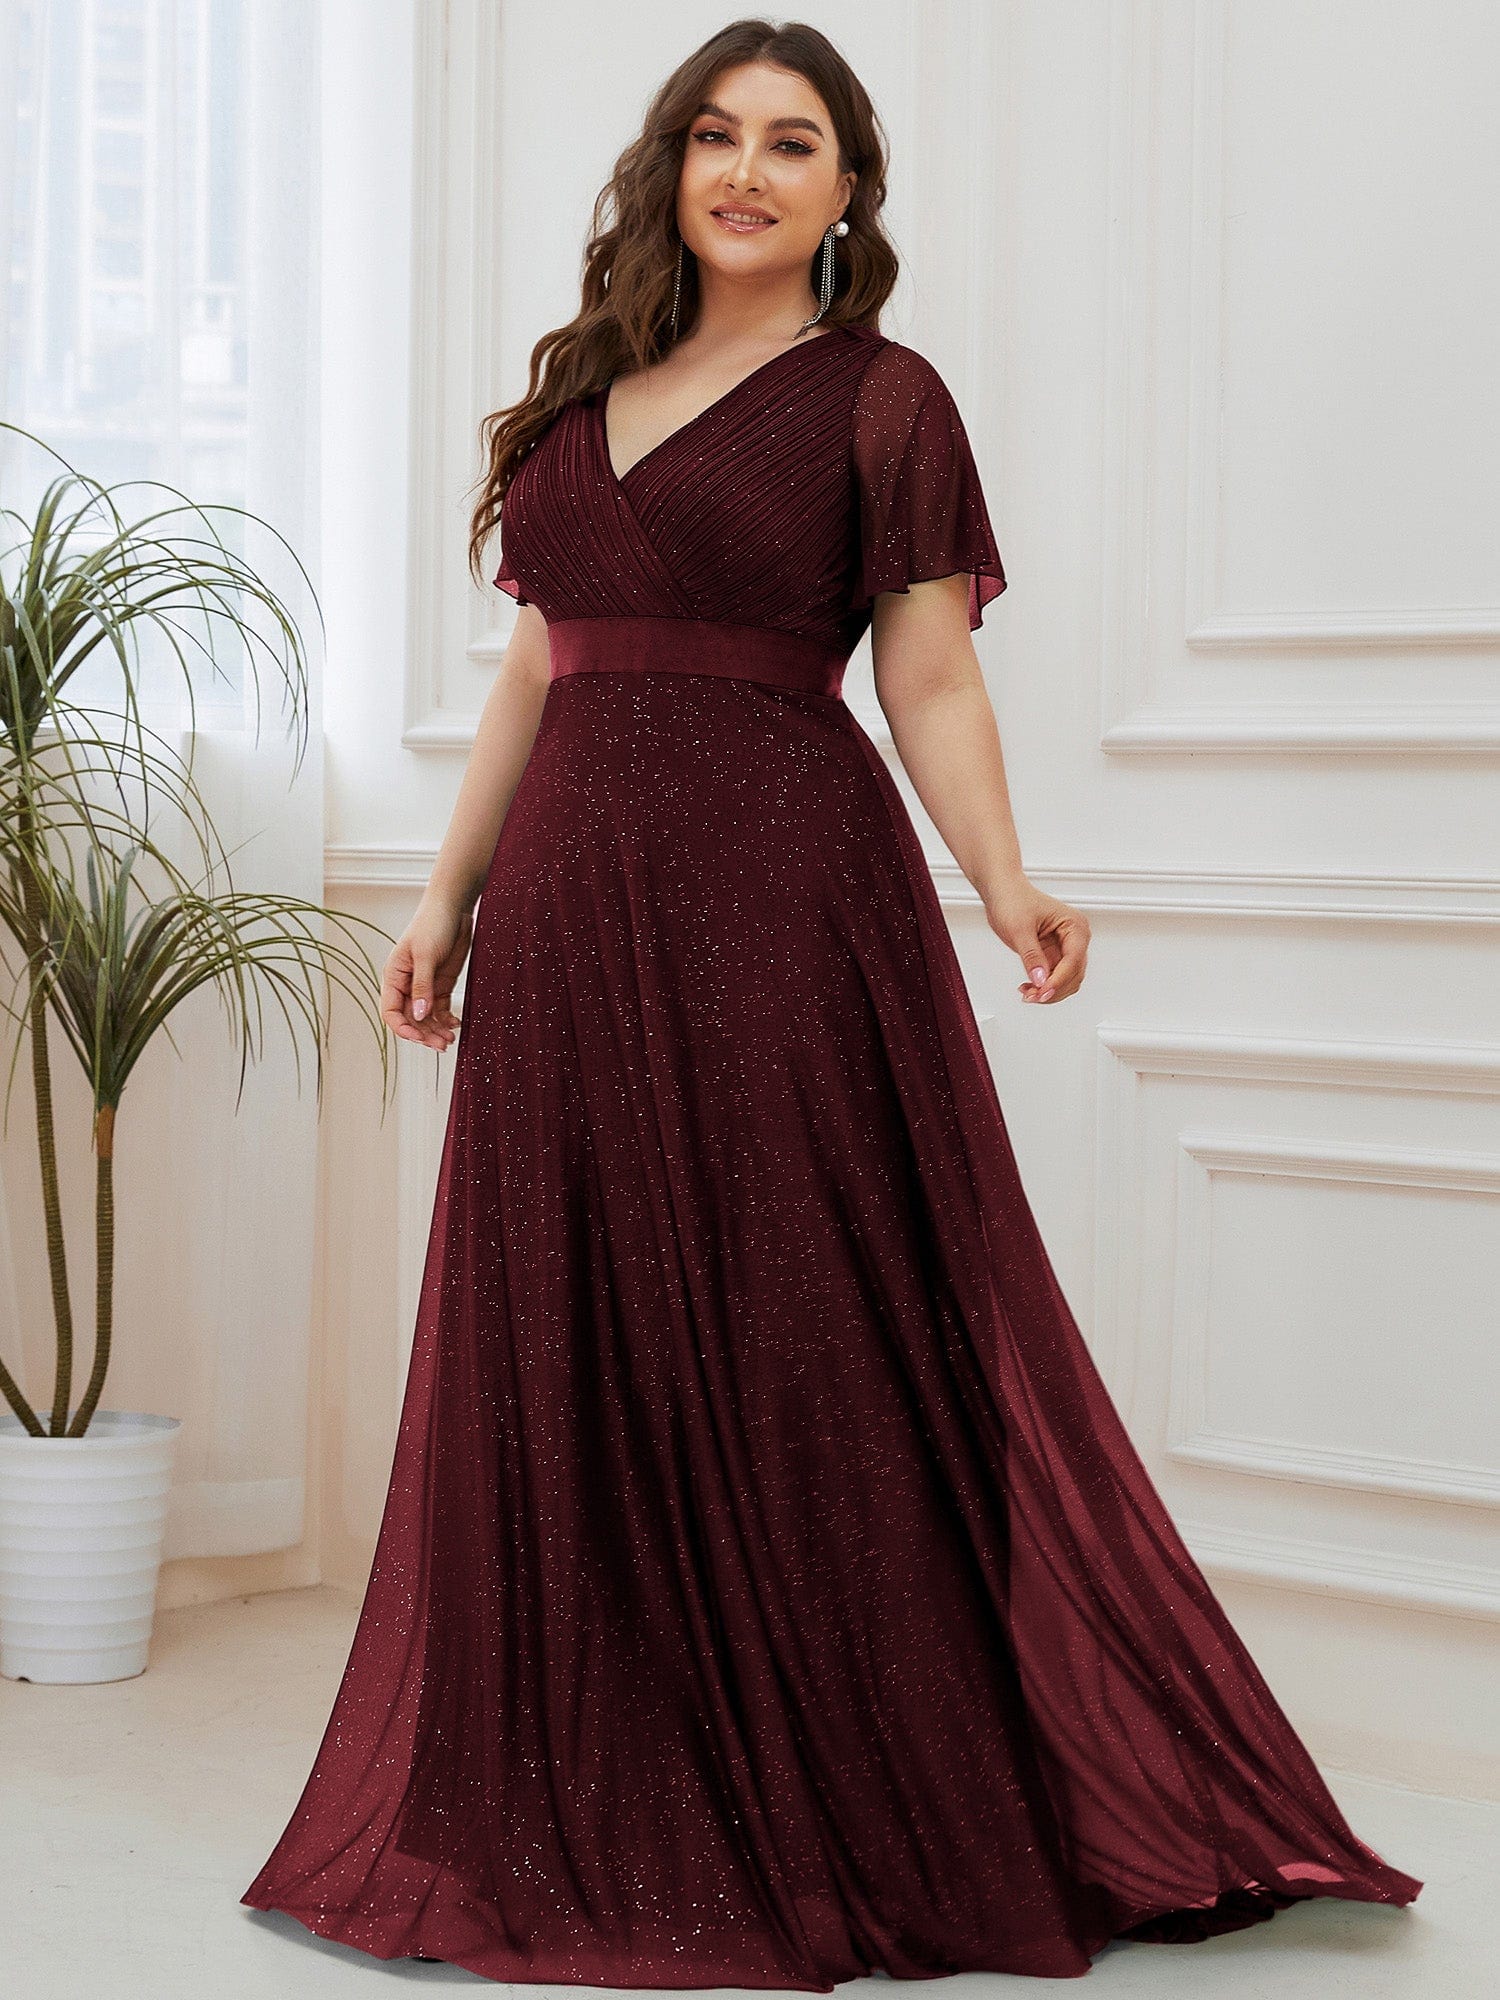 Gold Applique Sweetheart Ball Gown With Red Shiny Ruby Beads Necklace  Perfect For Quinceanera, Pageants, And Sweet 16 Celebrations From  Zaomeng321, $267.22 | DHgate.Com